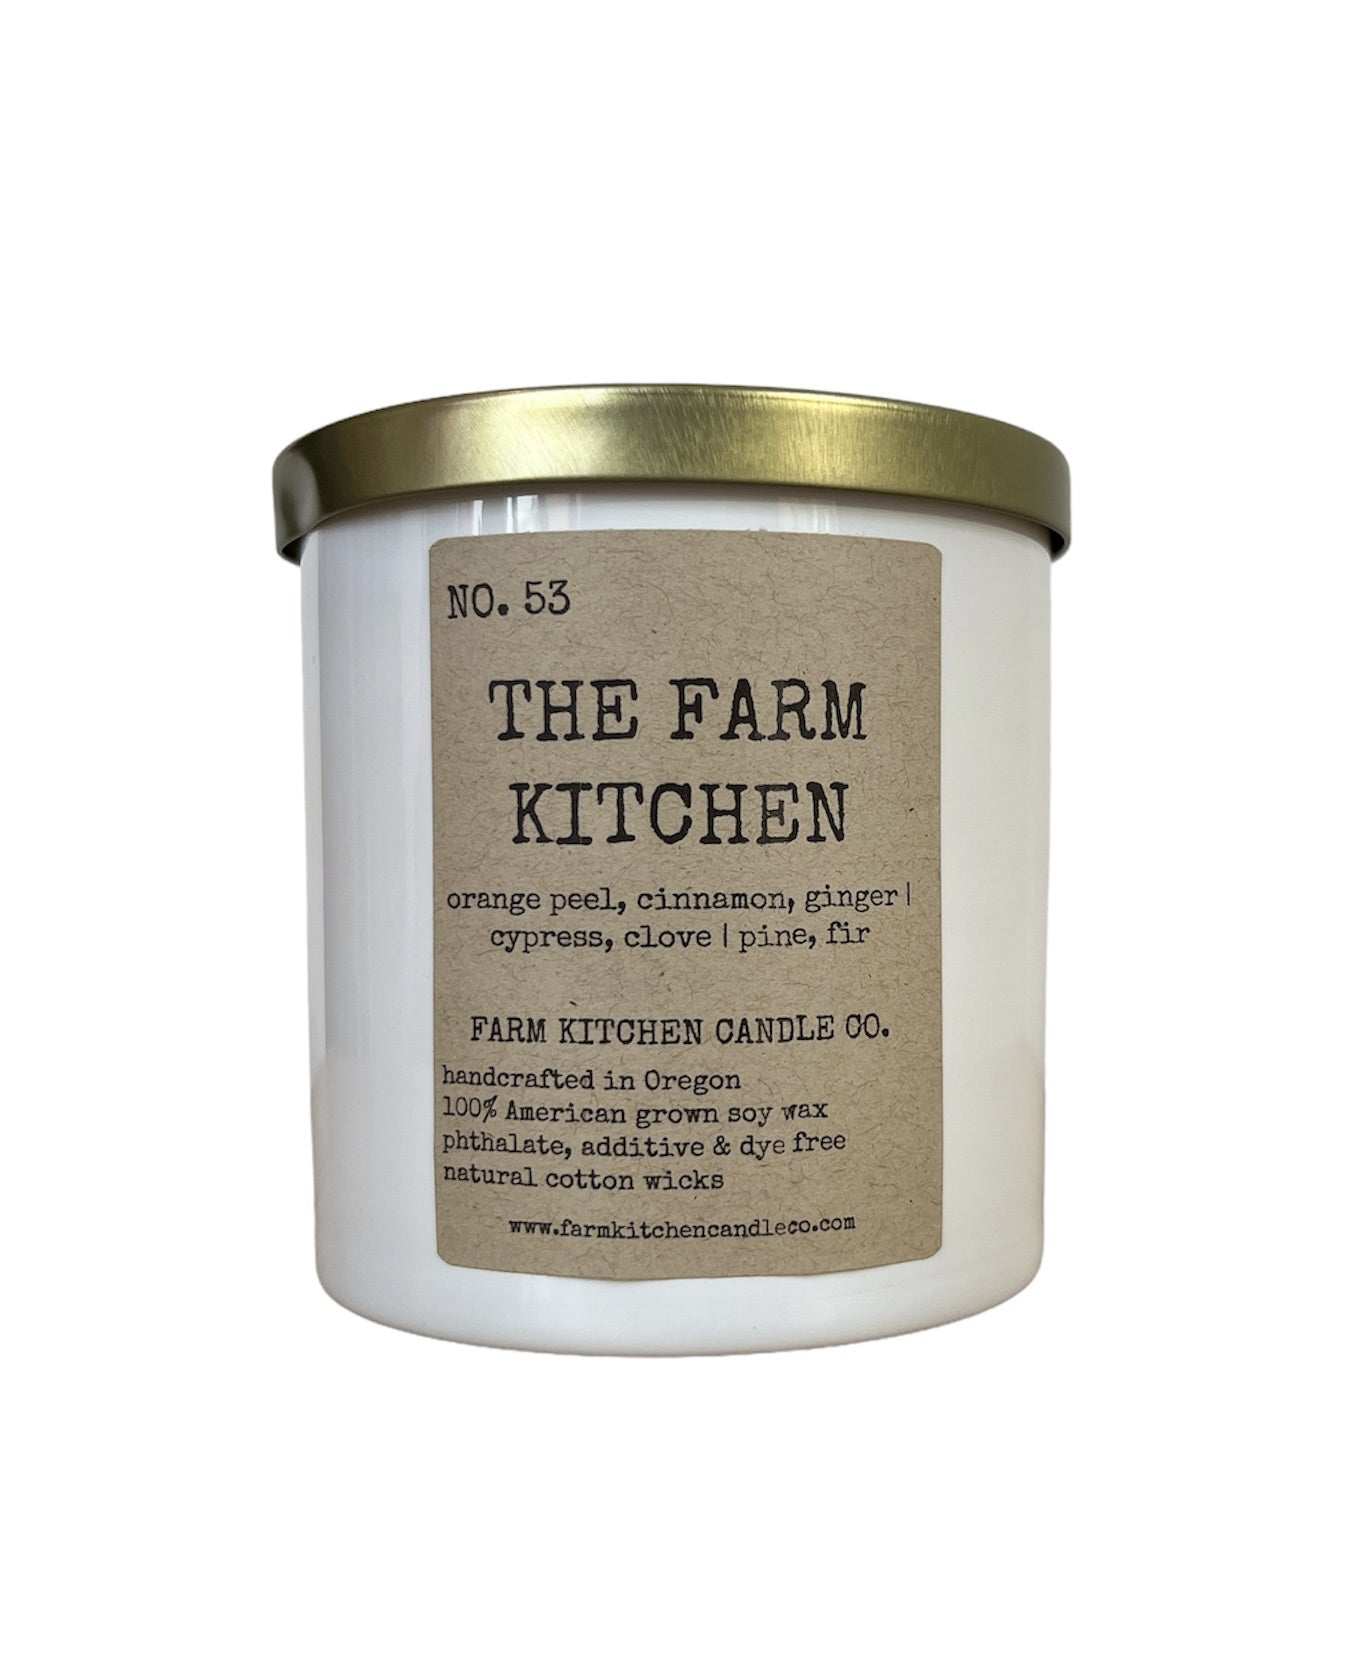 FARM KITCHEN CANDLE CO - SINGLE WICK SOY CANDLE IN THE FARM KITCHEN